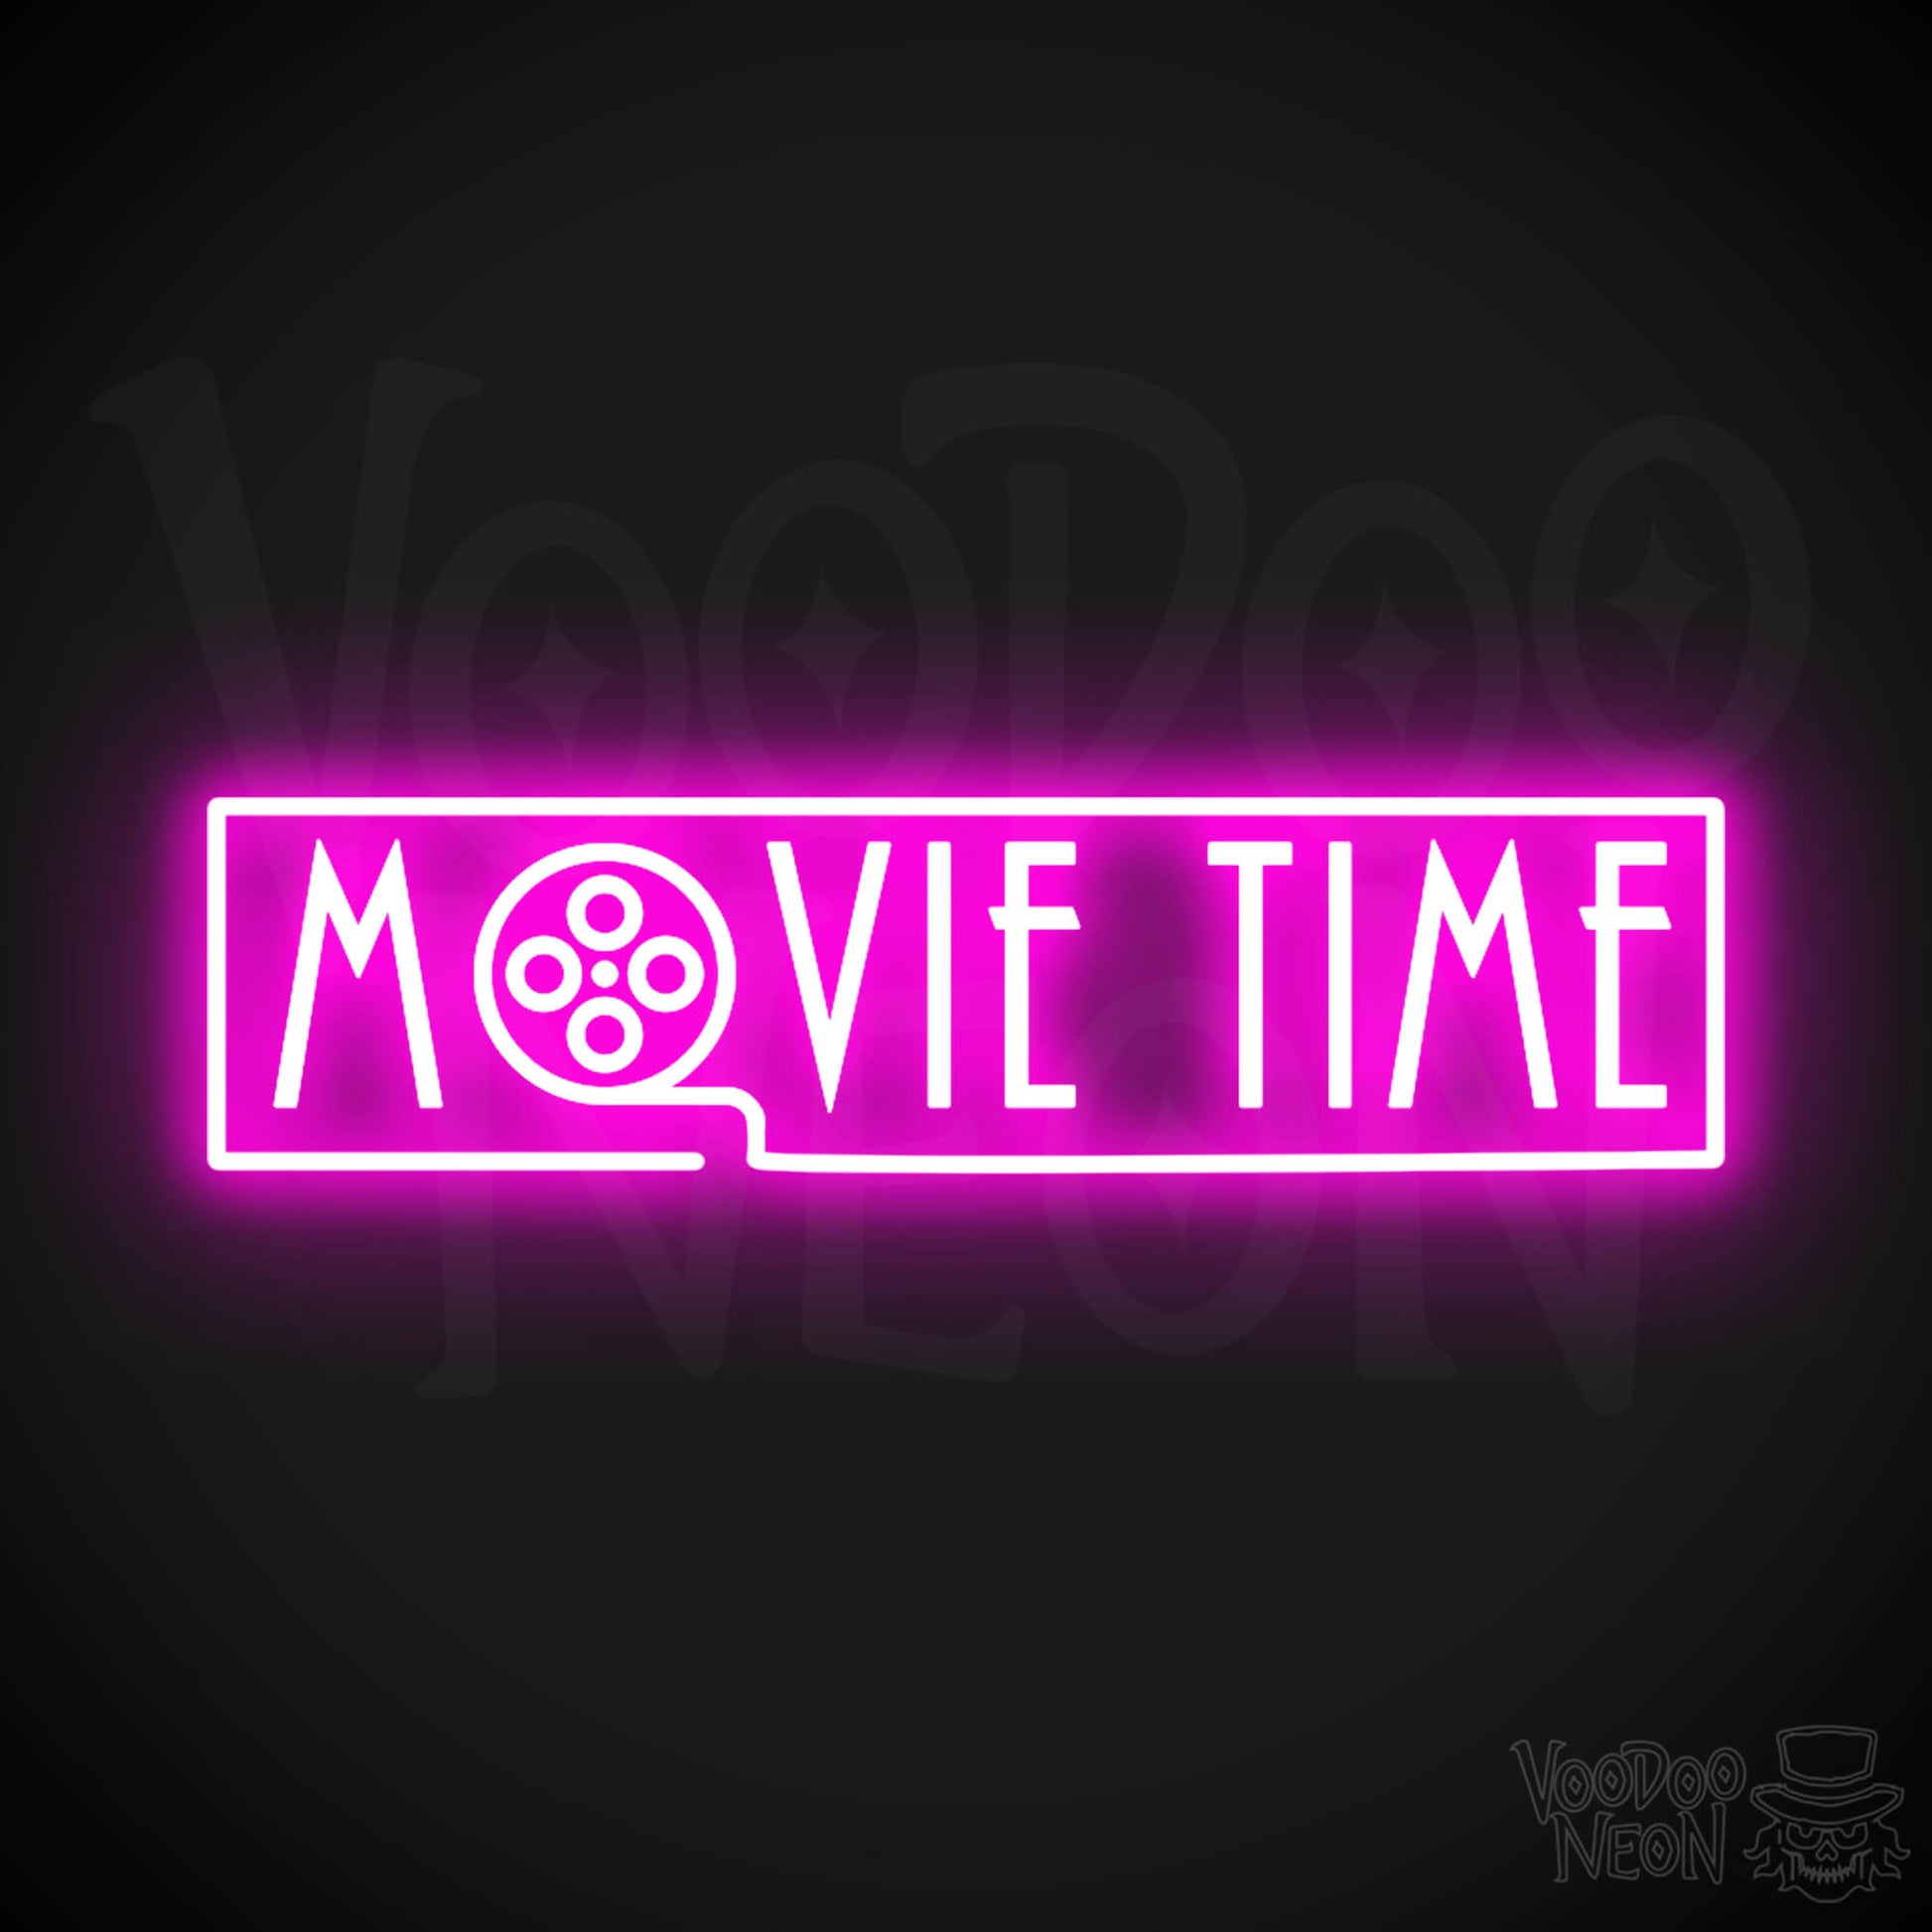 Movie Time Neon Sign - Neon Movie Time Sign - Color Pink